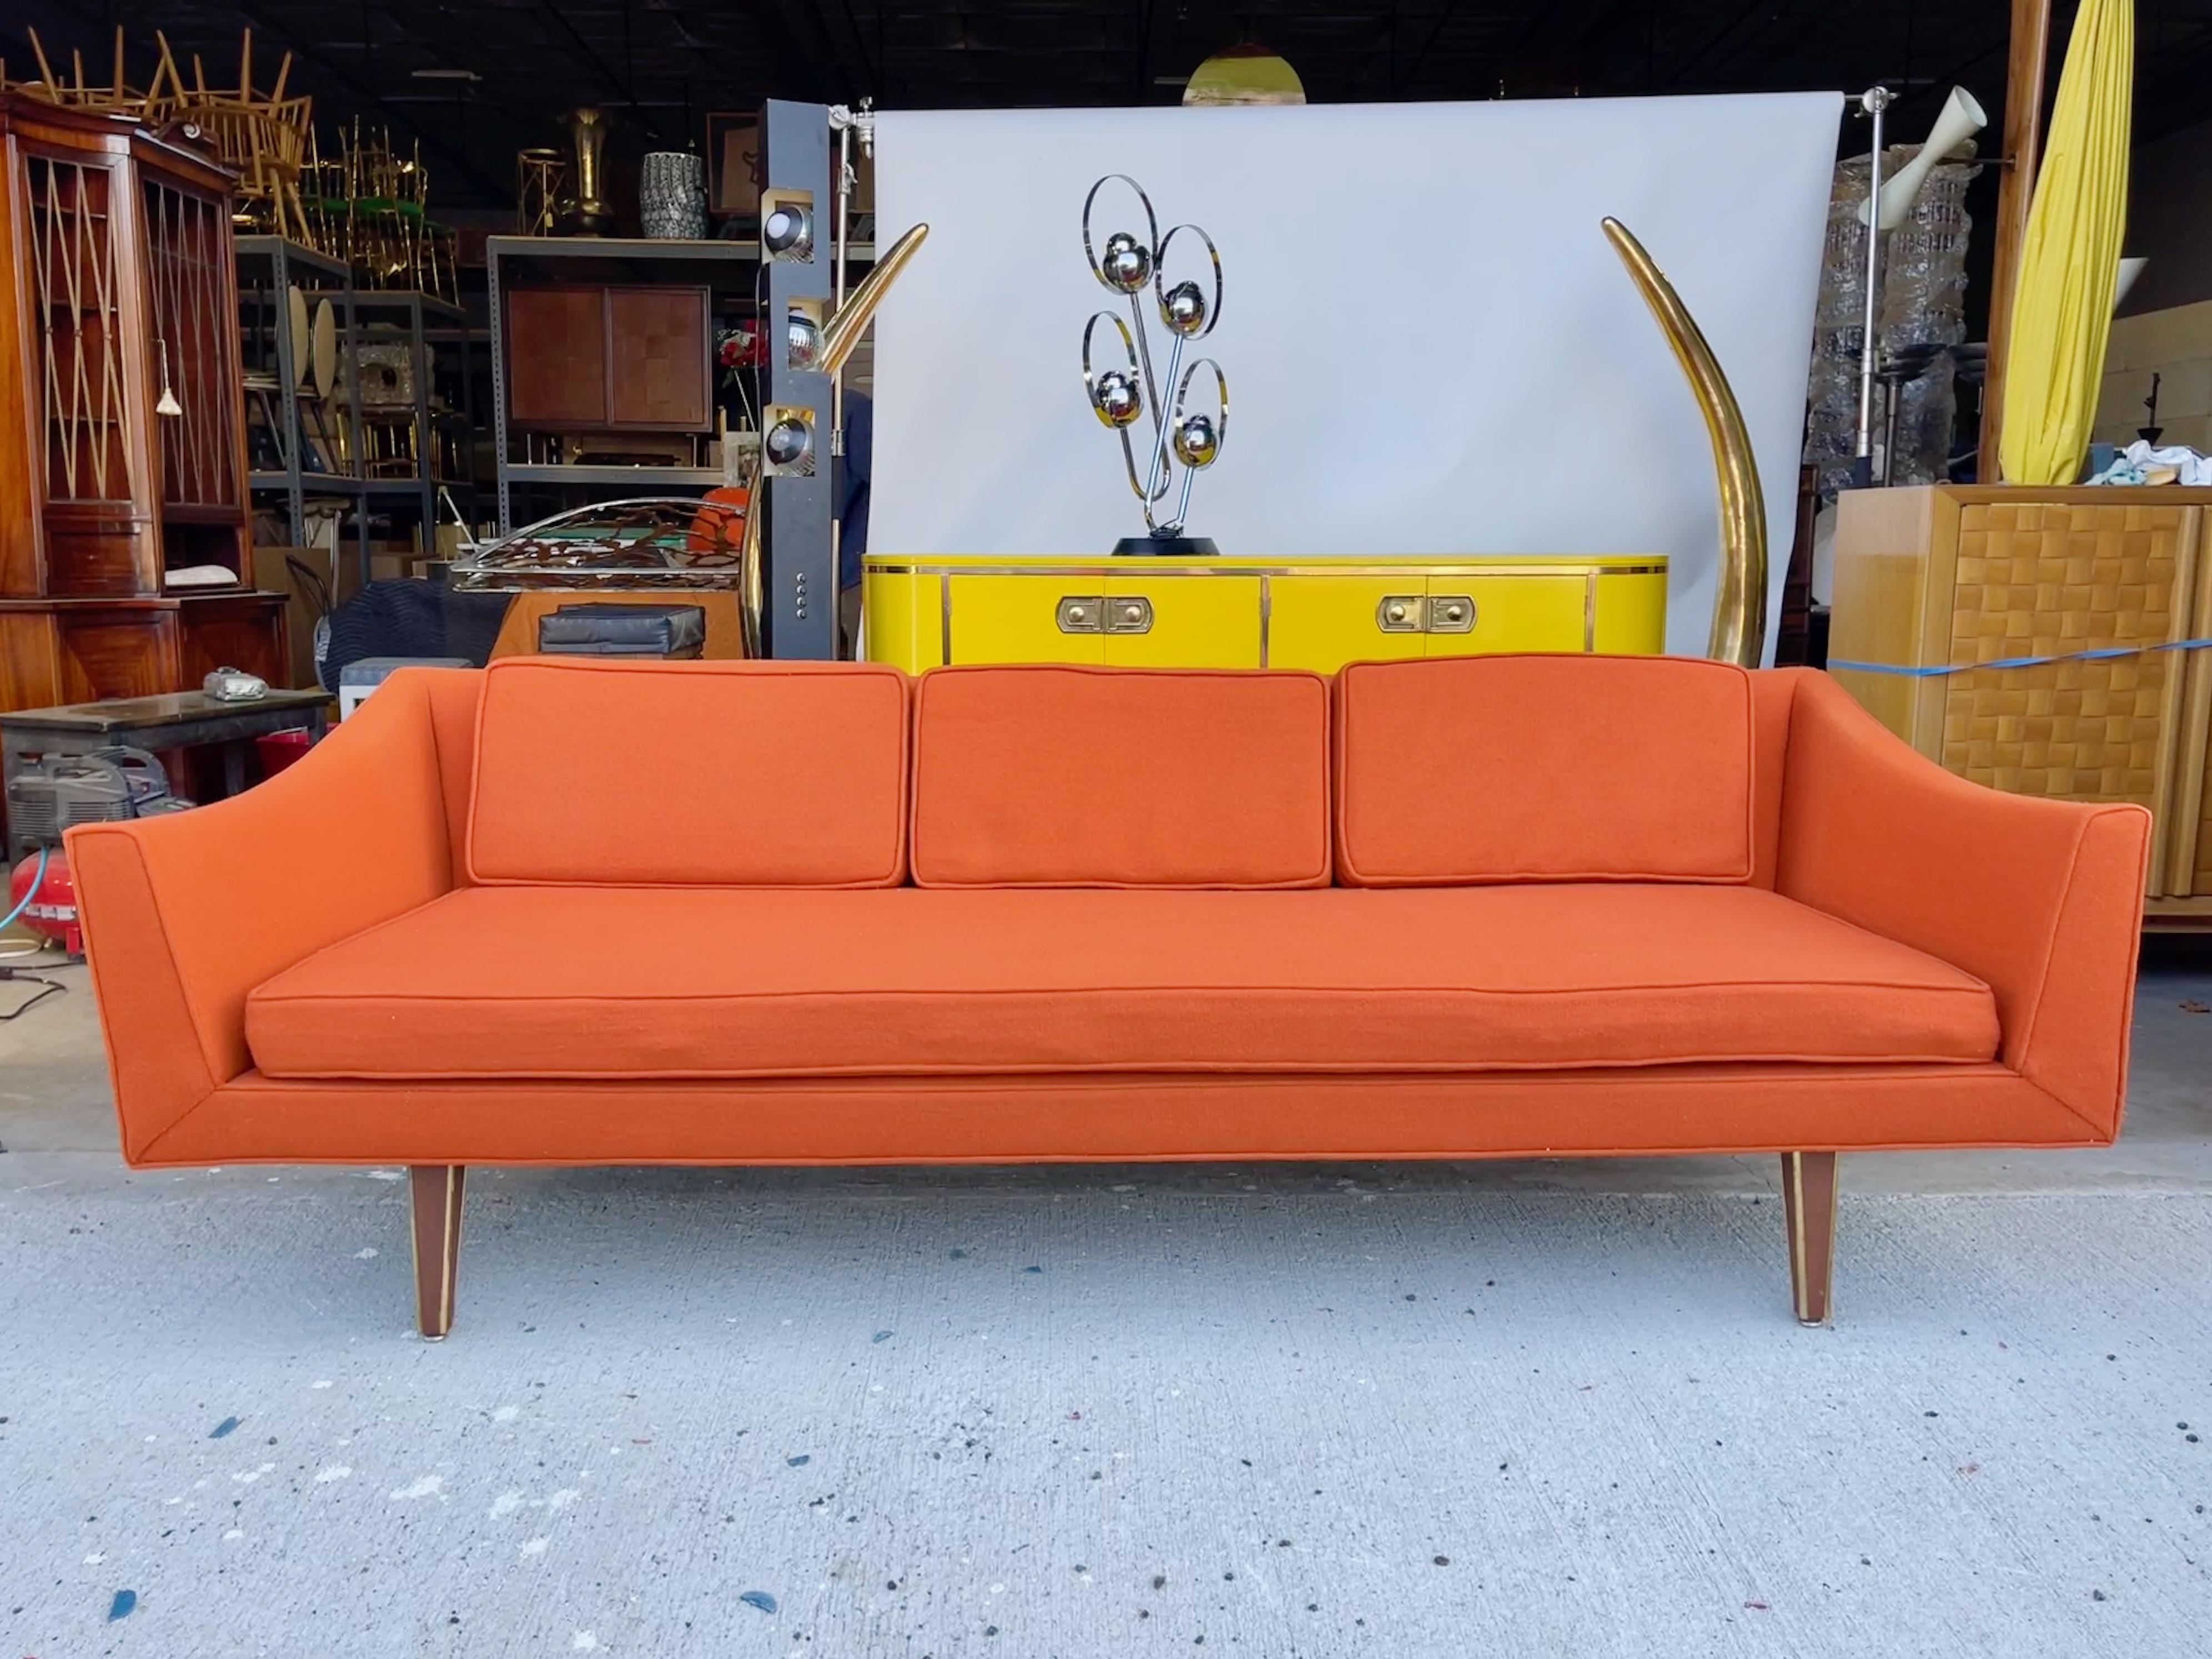 At last, a mid-century sofa at a comfortable seat height thanks to its 10 inch high legs.
Original Harvey Probber mid-century modern sofa with distinctive sloped arms and square tapered walnut legs embellished with solid brass vertical corner